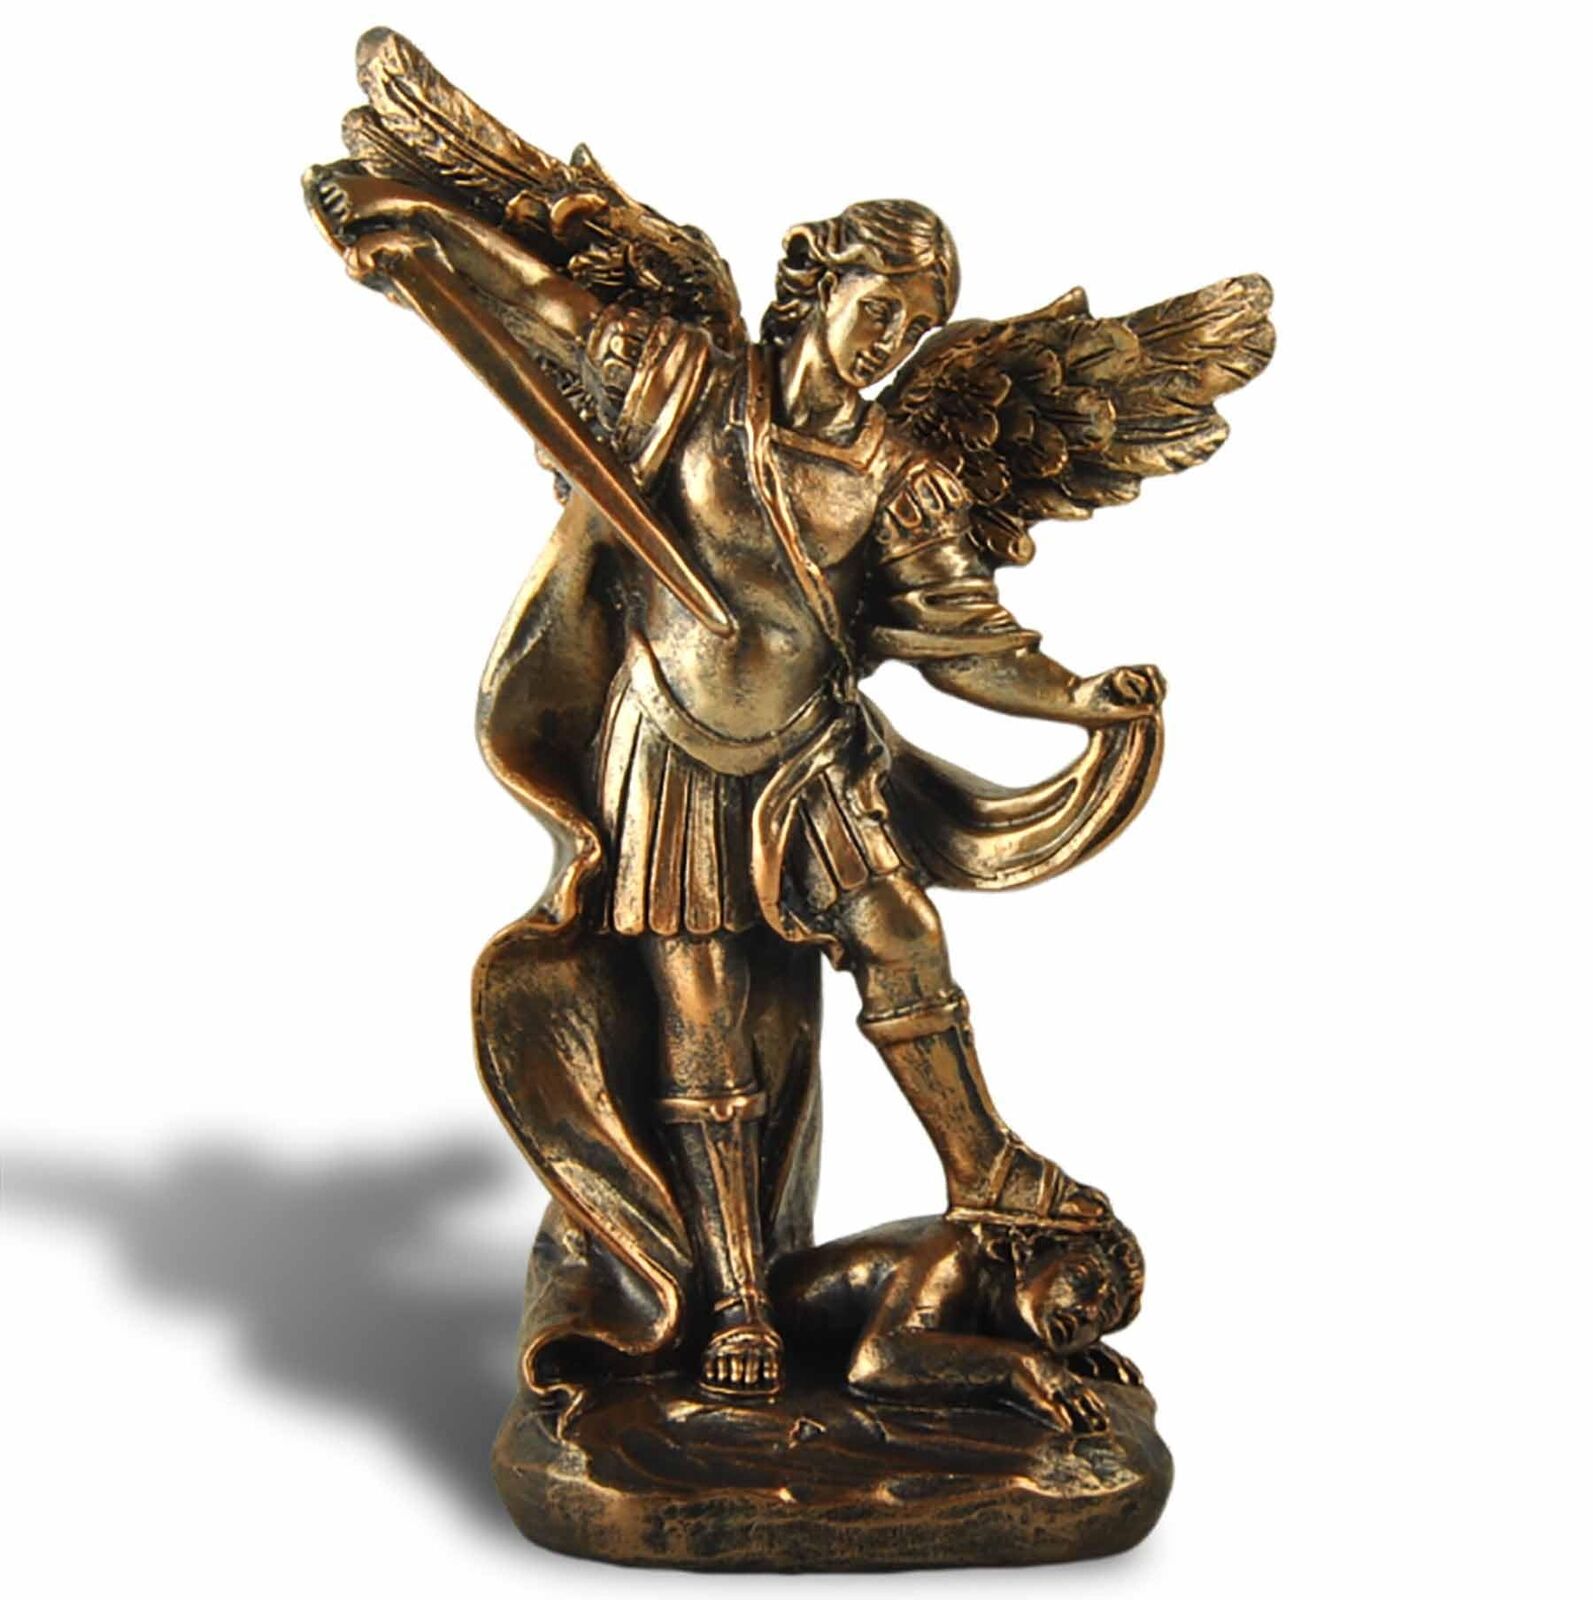 St. Michael The Archangel Statue - The Great Protector Saint Archangel Michae...